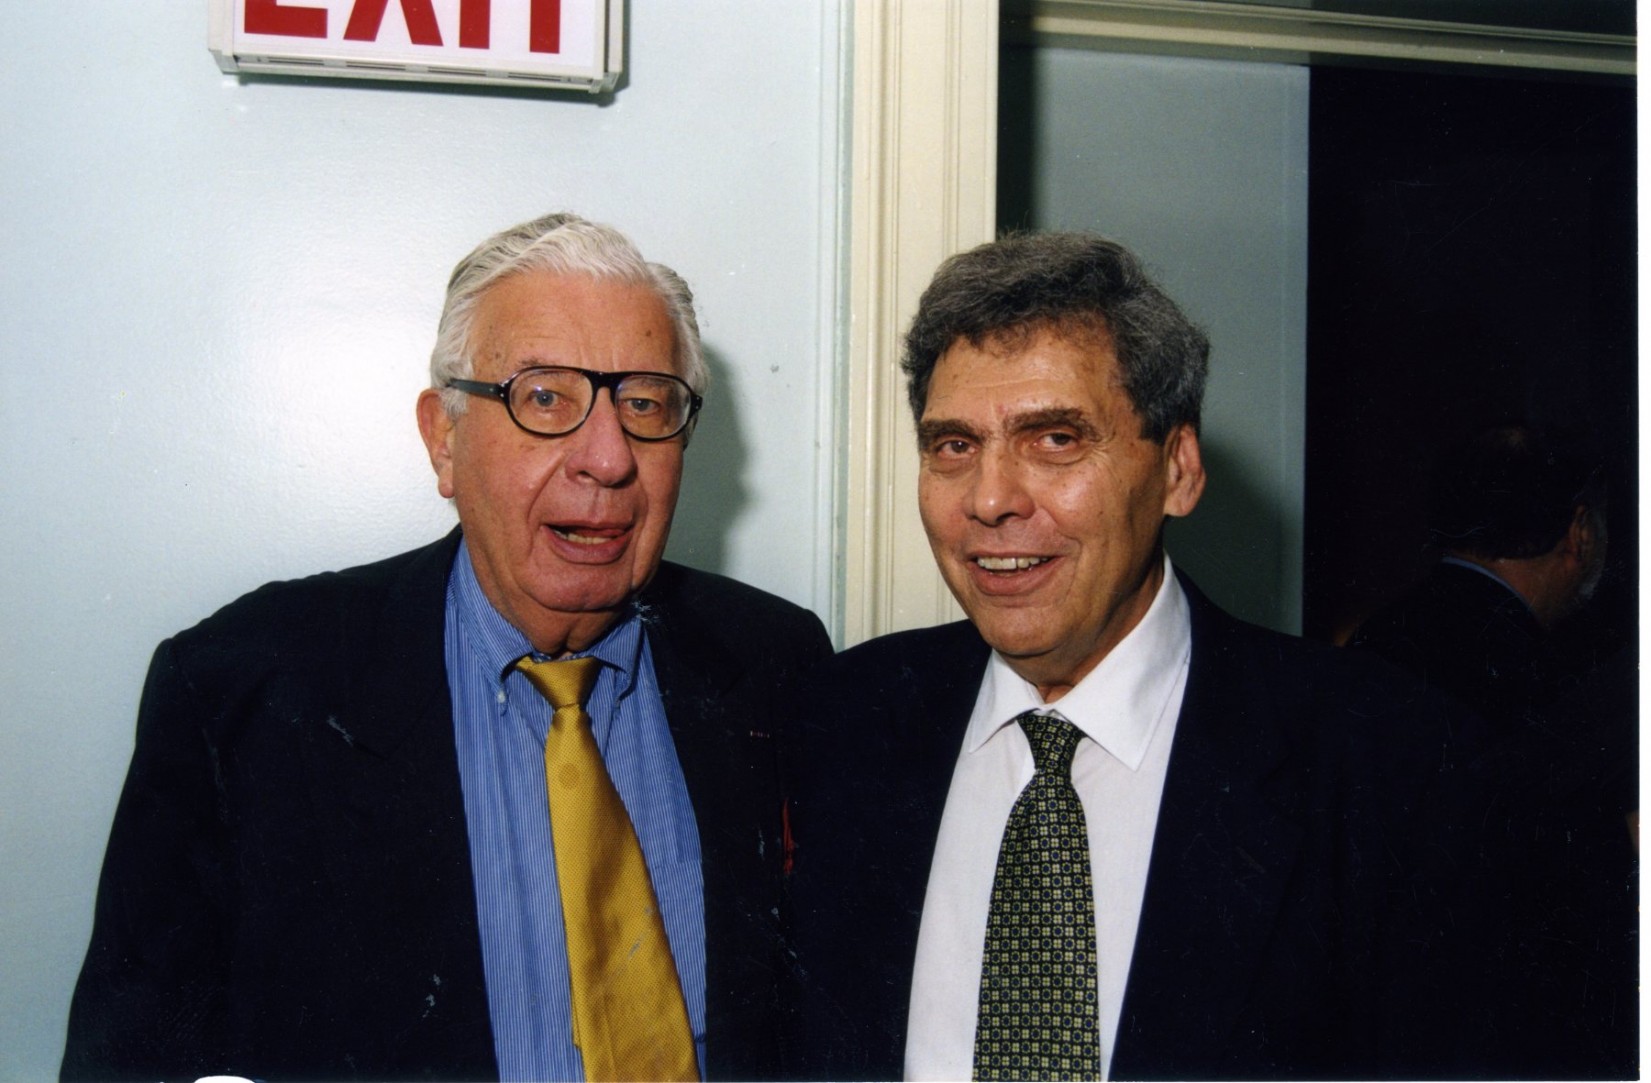 Jack Rudin and Neil Postman prior to the inaugural Rudin Lecture, October 4, 2000